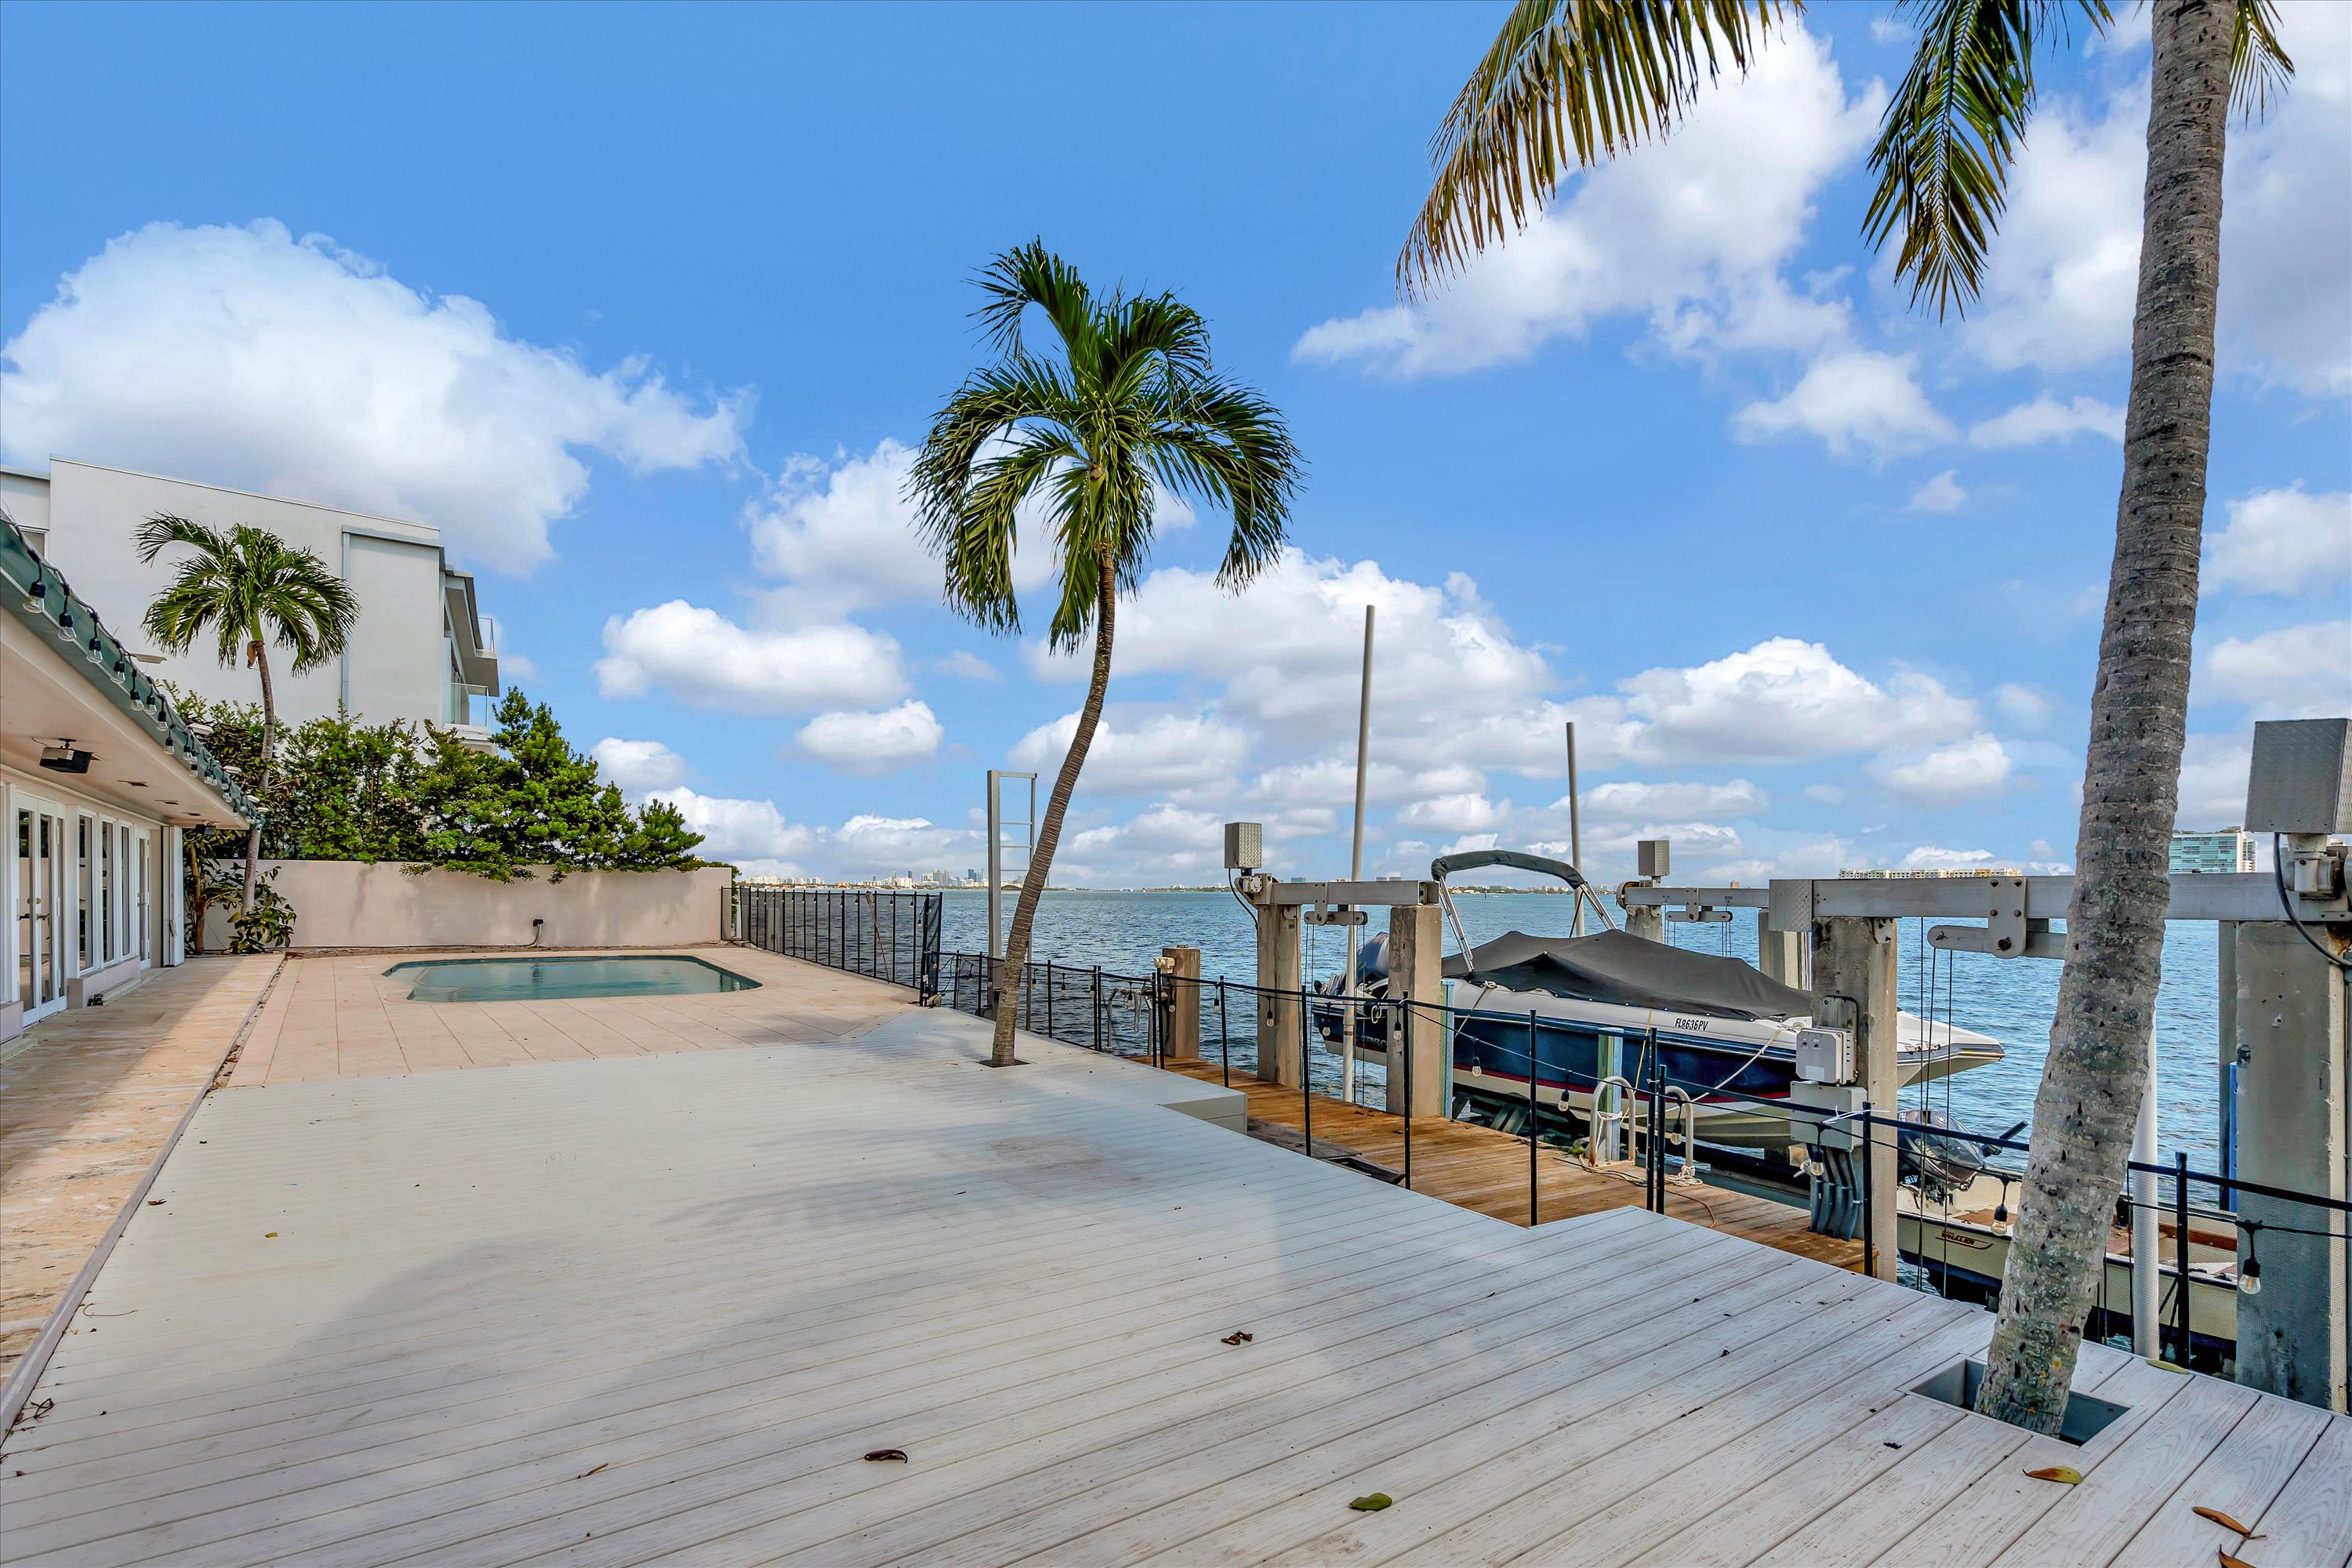 Beautiful Edgewater, Miami, FL house showcasing the best property management services